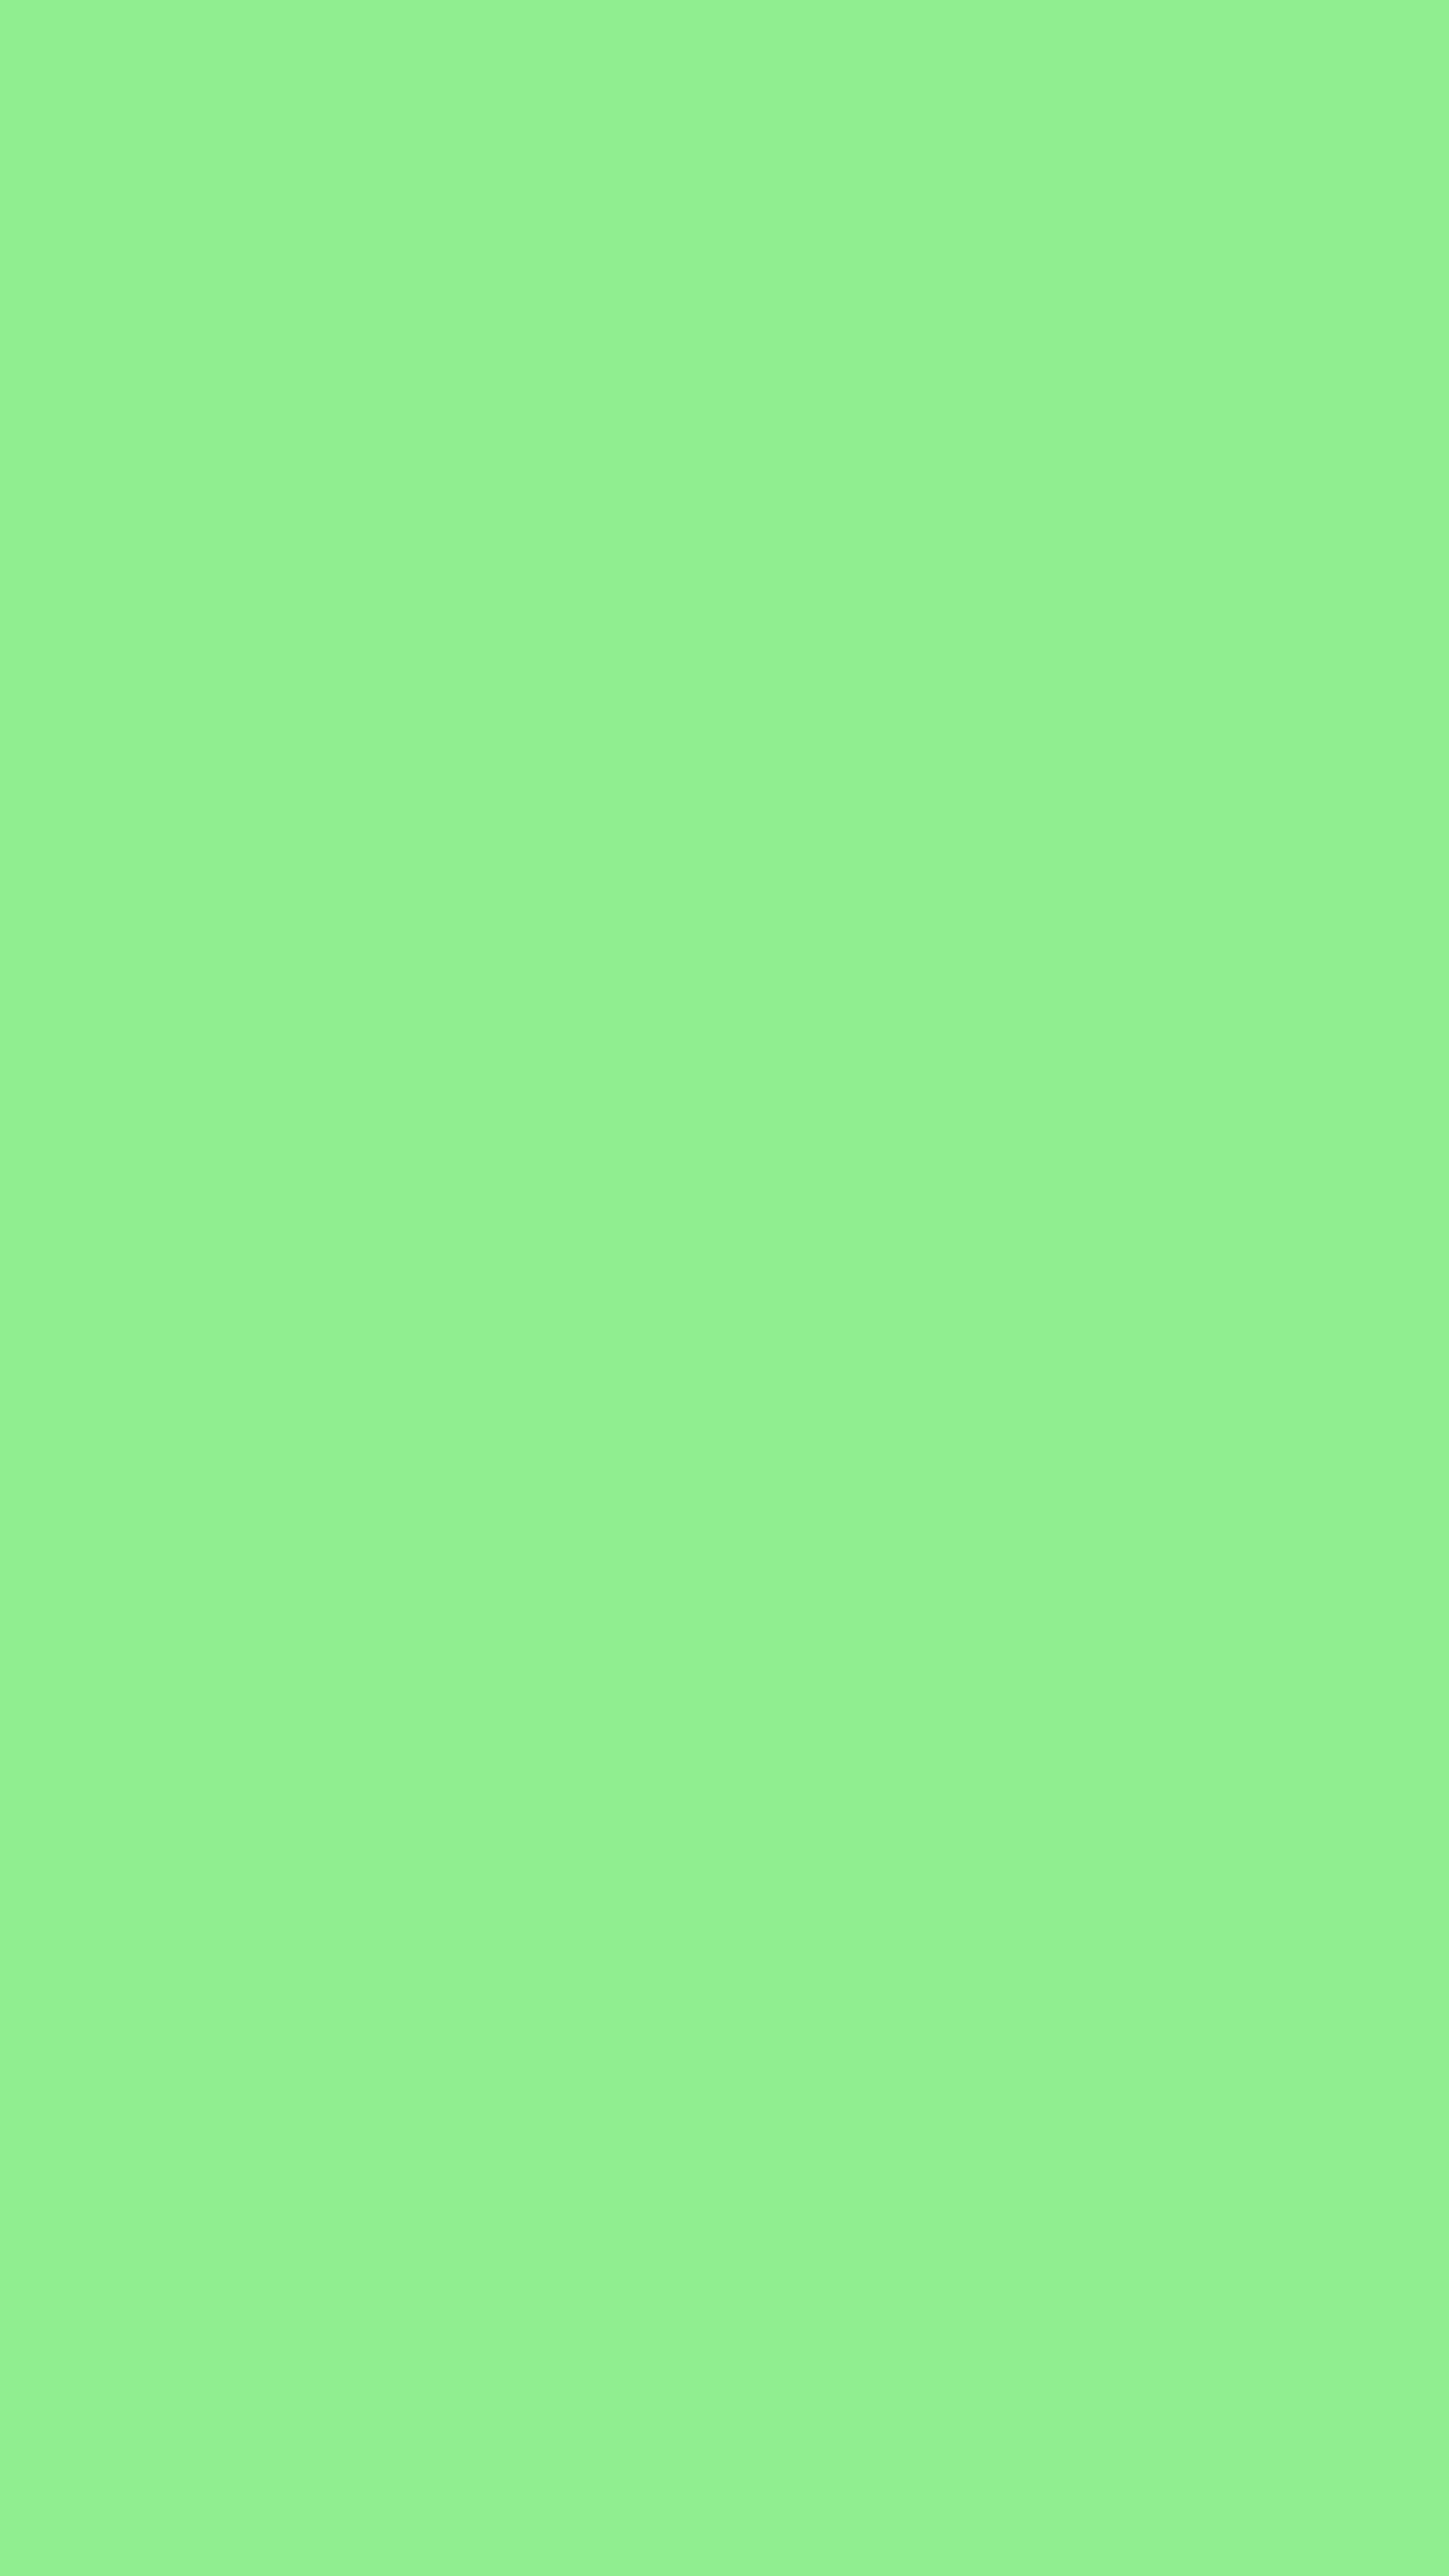 2160x3840 Light Green Solid Color Background Wallpaper for Mobile Phone